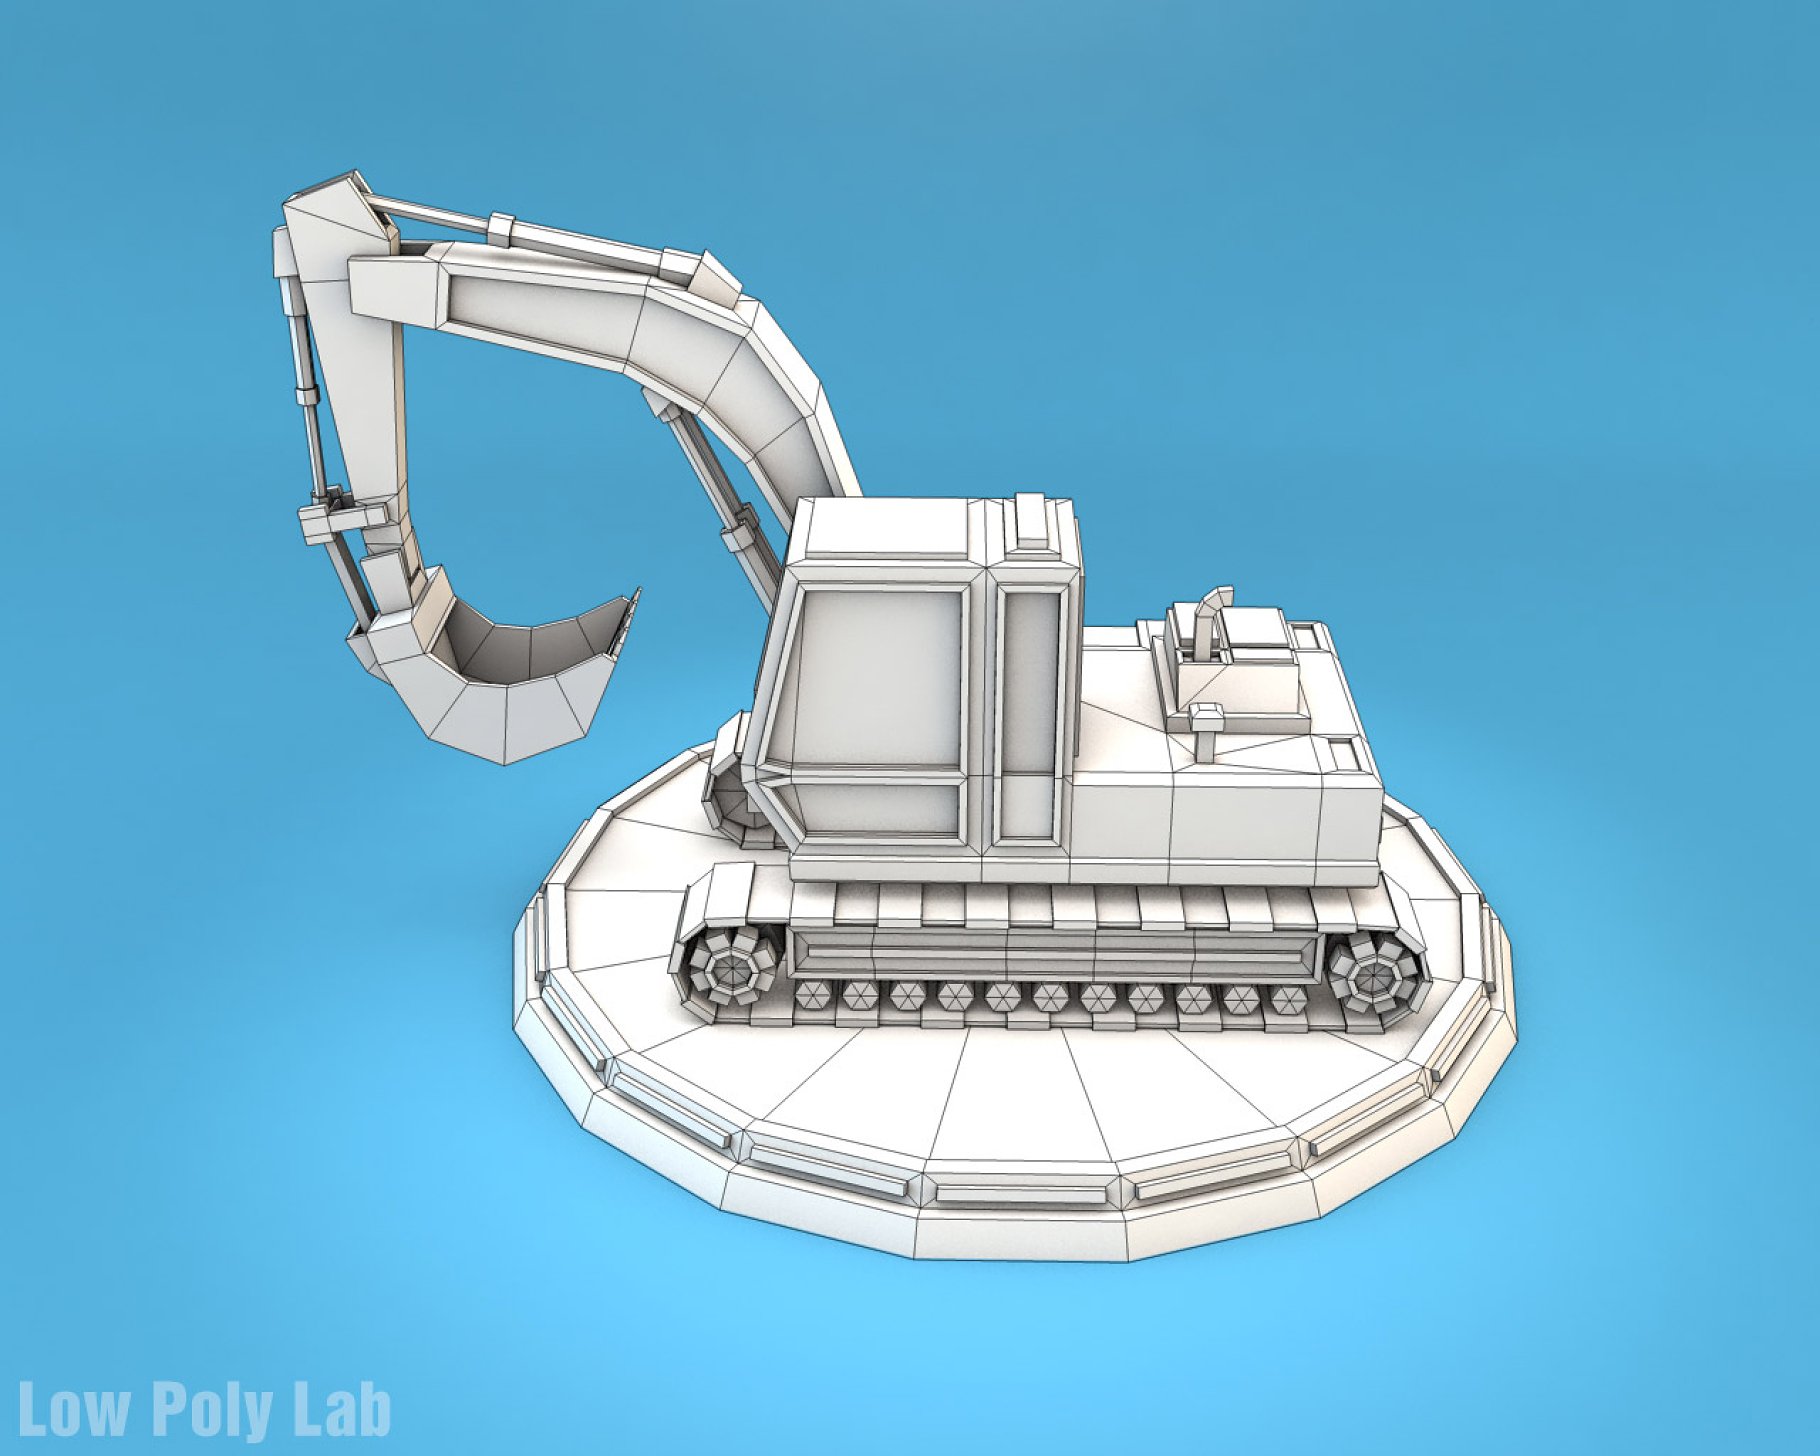 Gray low poly excavator mockup in left on a blue background.